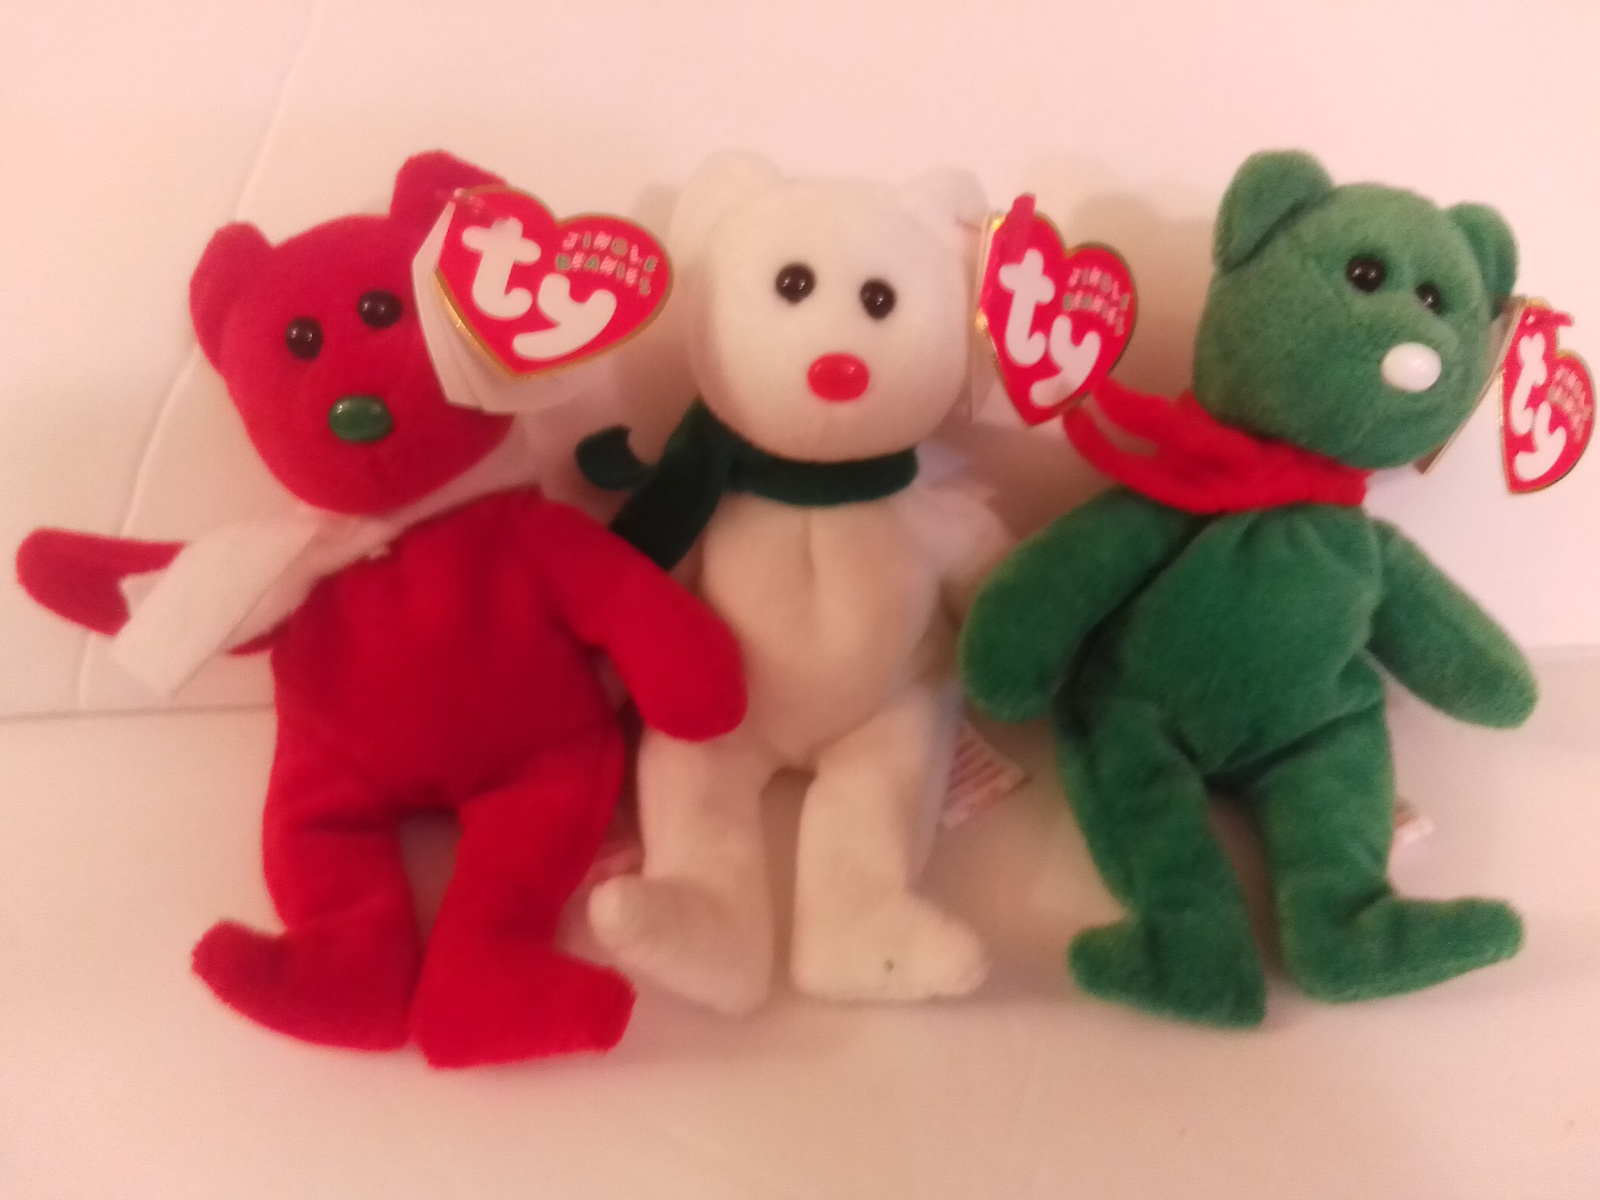 Primary image for TY 2007 Jingle Beanies Set of 3 Bears Lil' Flakes / Lil' Frosts / Lil Freezes